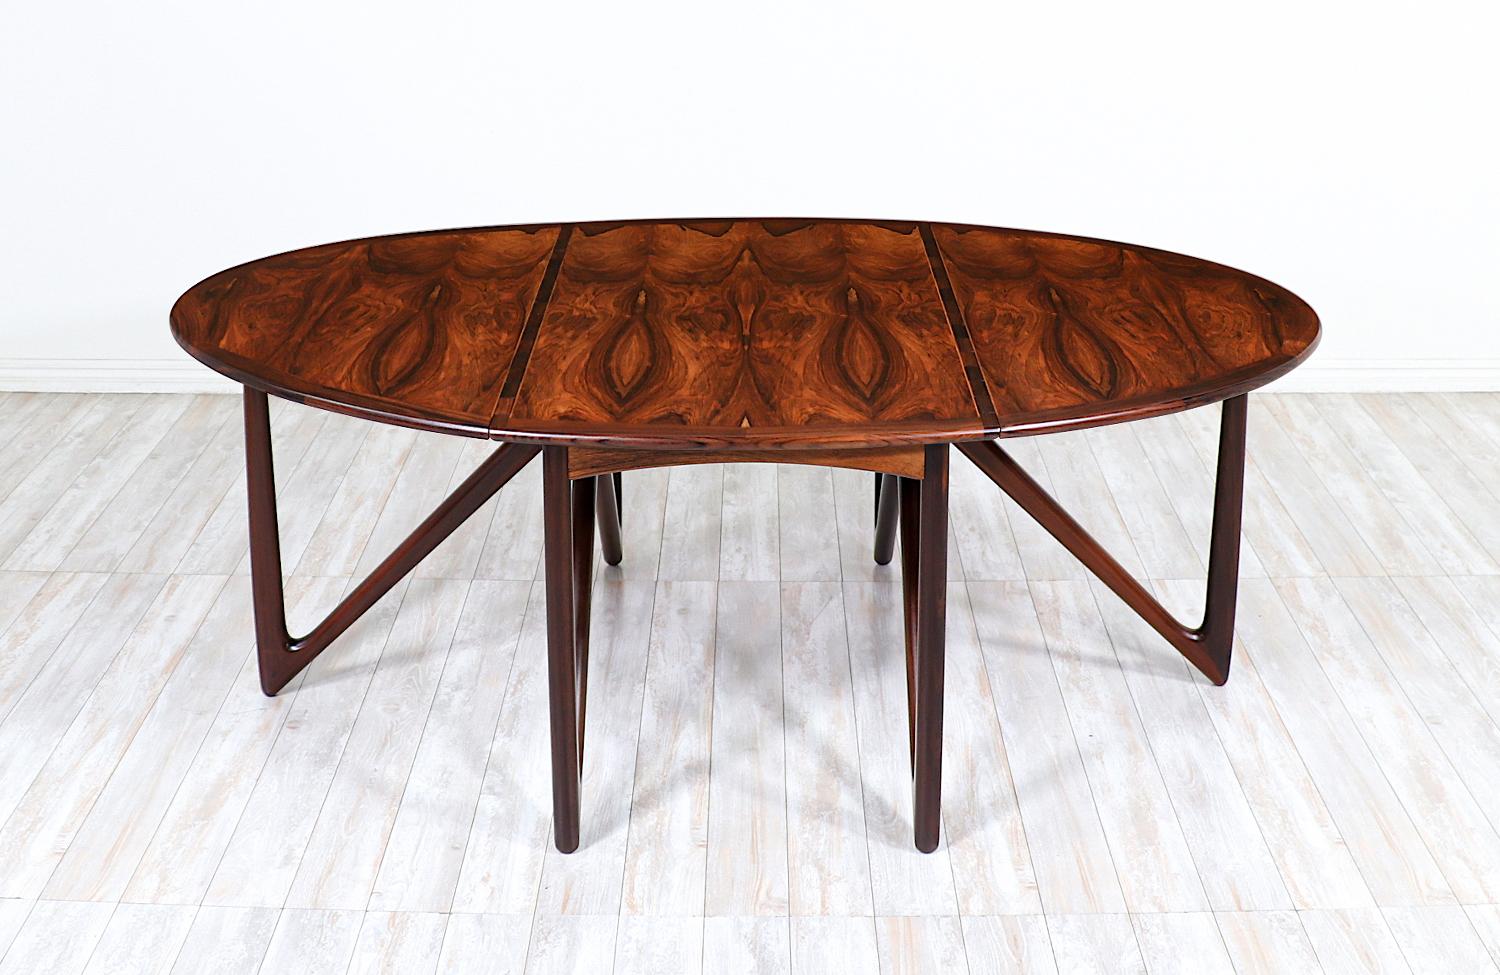 Versatile dining table designed by Danish designer Niels Koefed in collaboration with the workshop of Koefoeds Møbelfabrik during the 1960s. Crafted from Brazilian rosewood, this table functions as a console, writing, or dining table with a